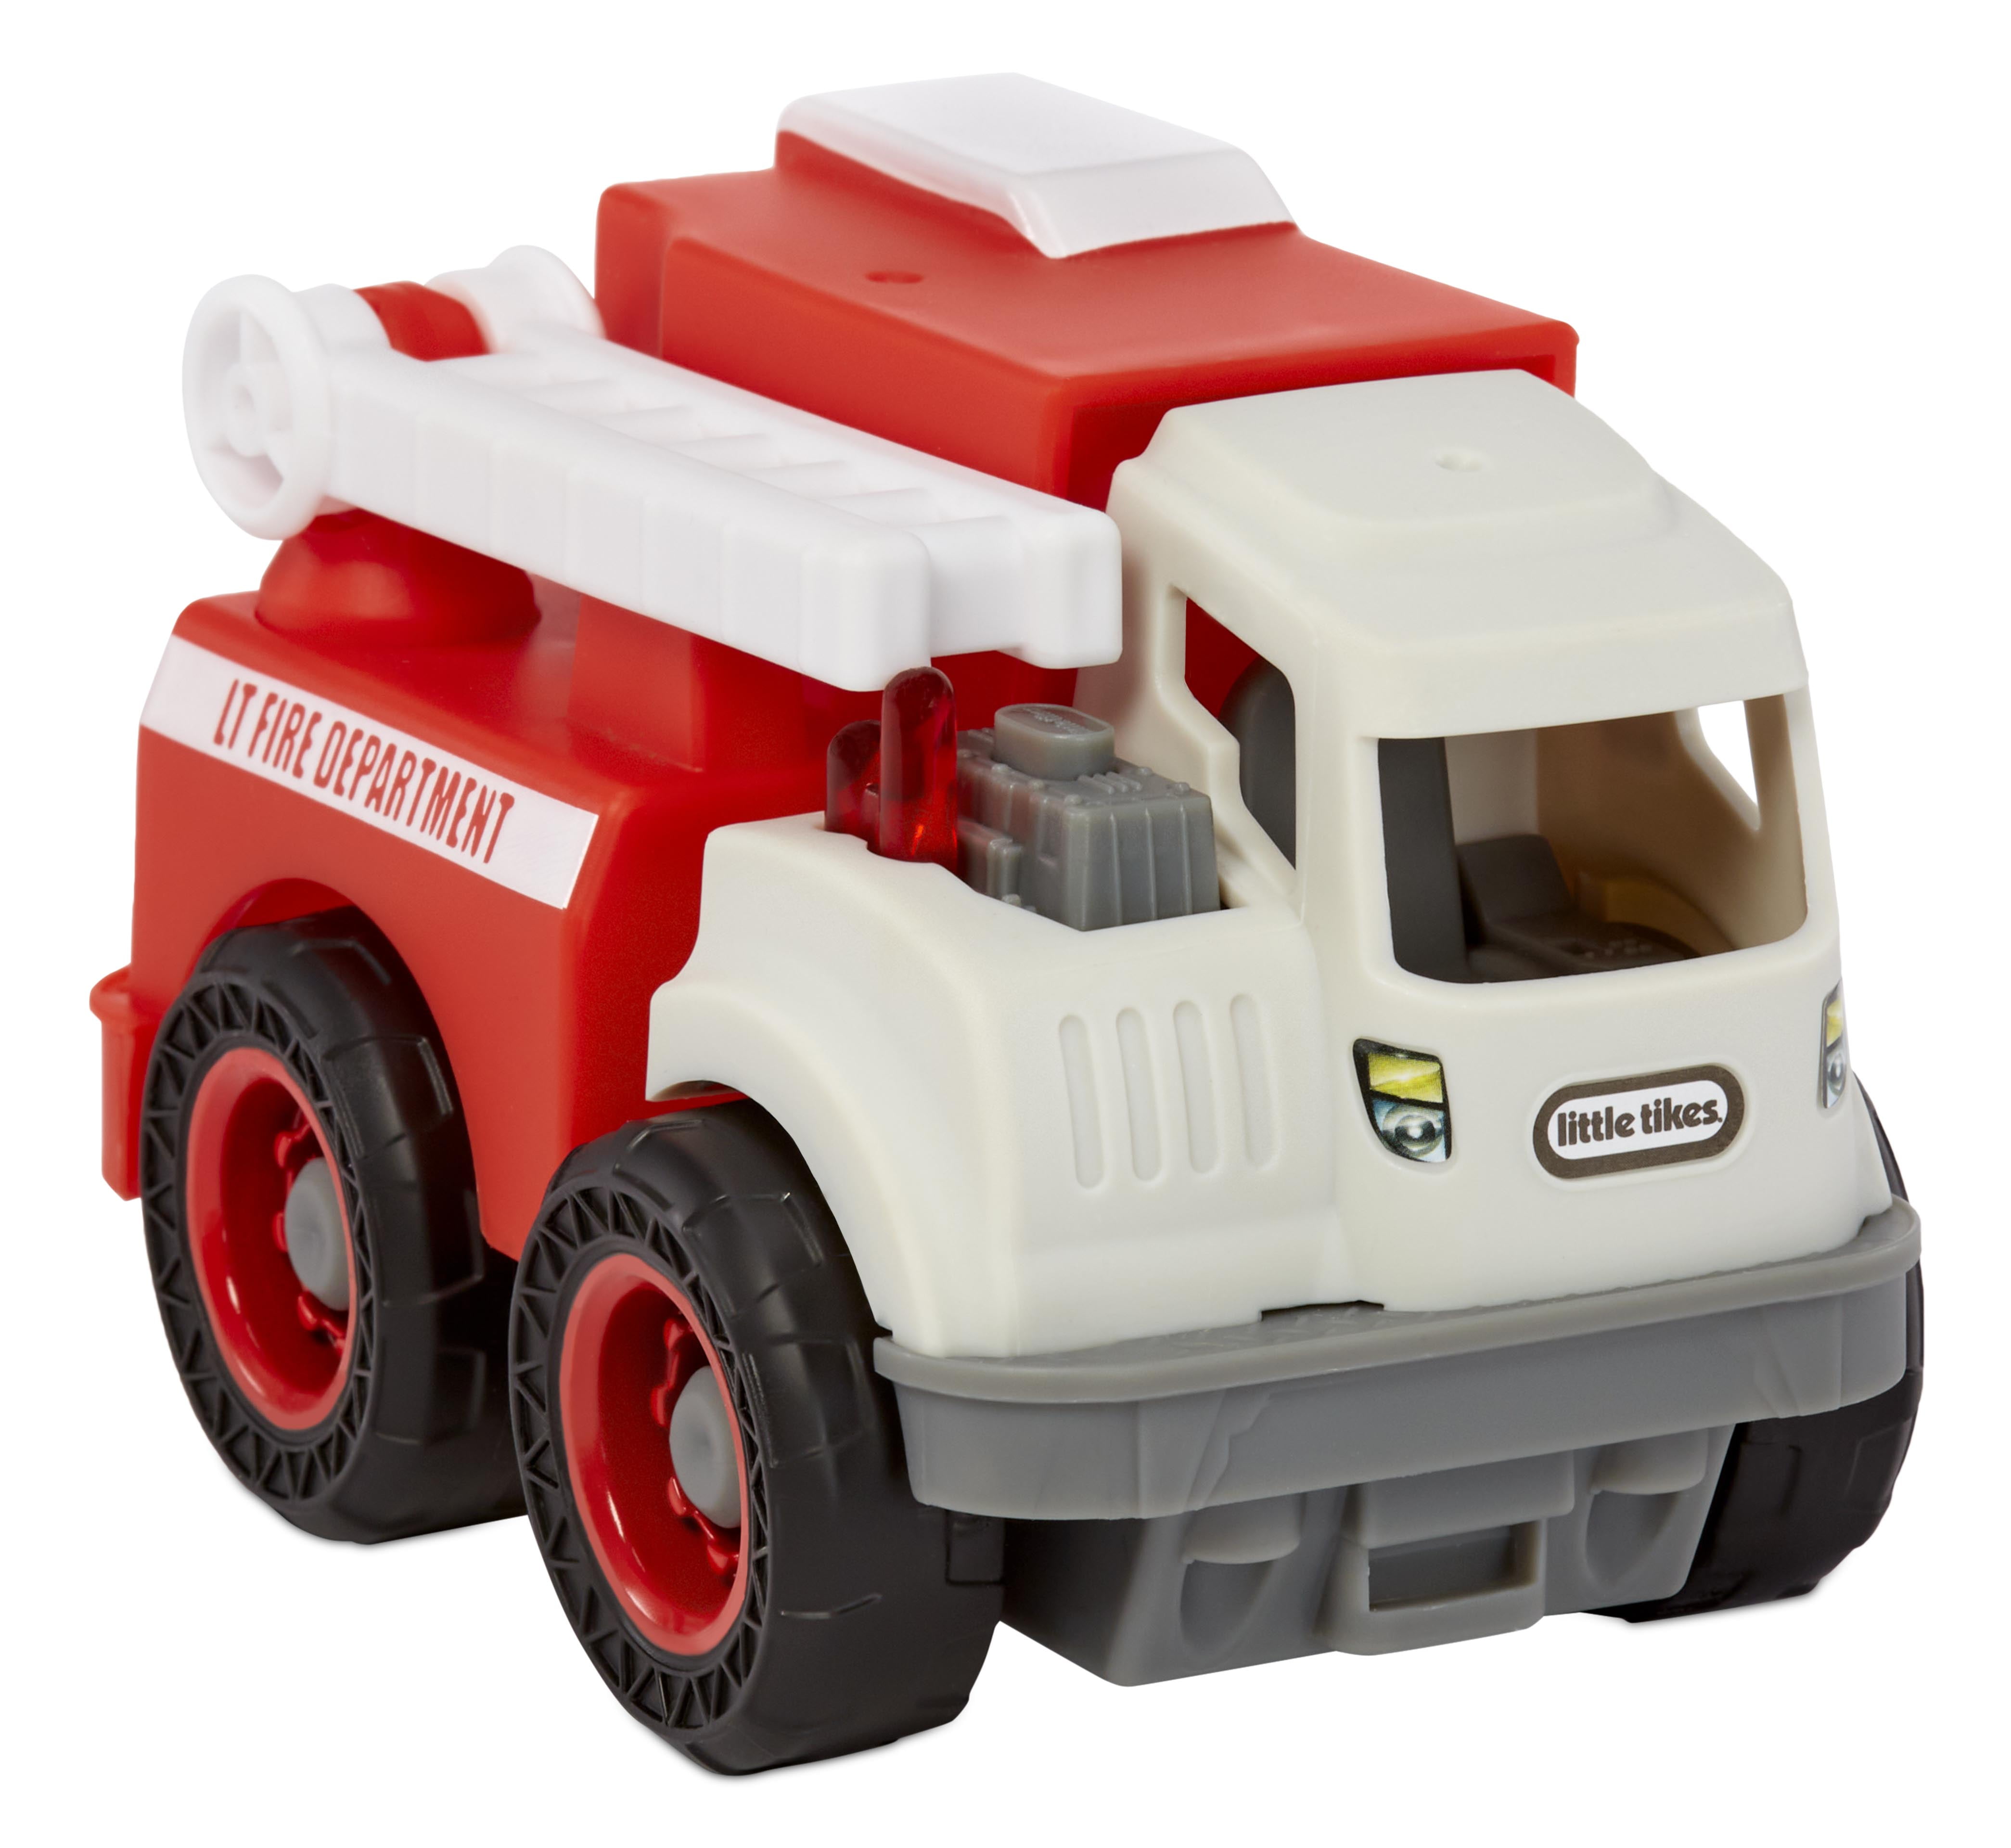 Little Tikes Dirt Diggers Mini Fire Truck Indoor Outdoor Multicolor Toy Car and Toy Vehicles for On the Go Play for Kids 2+